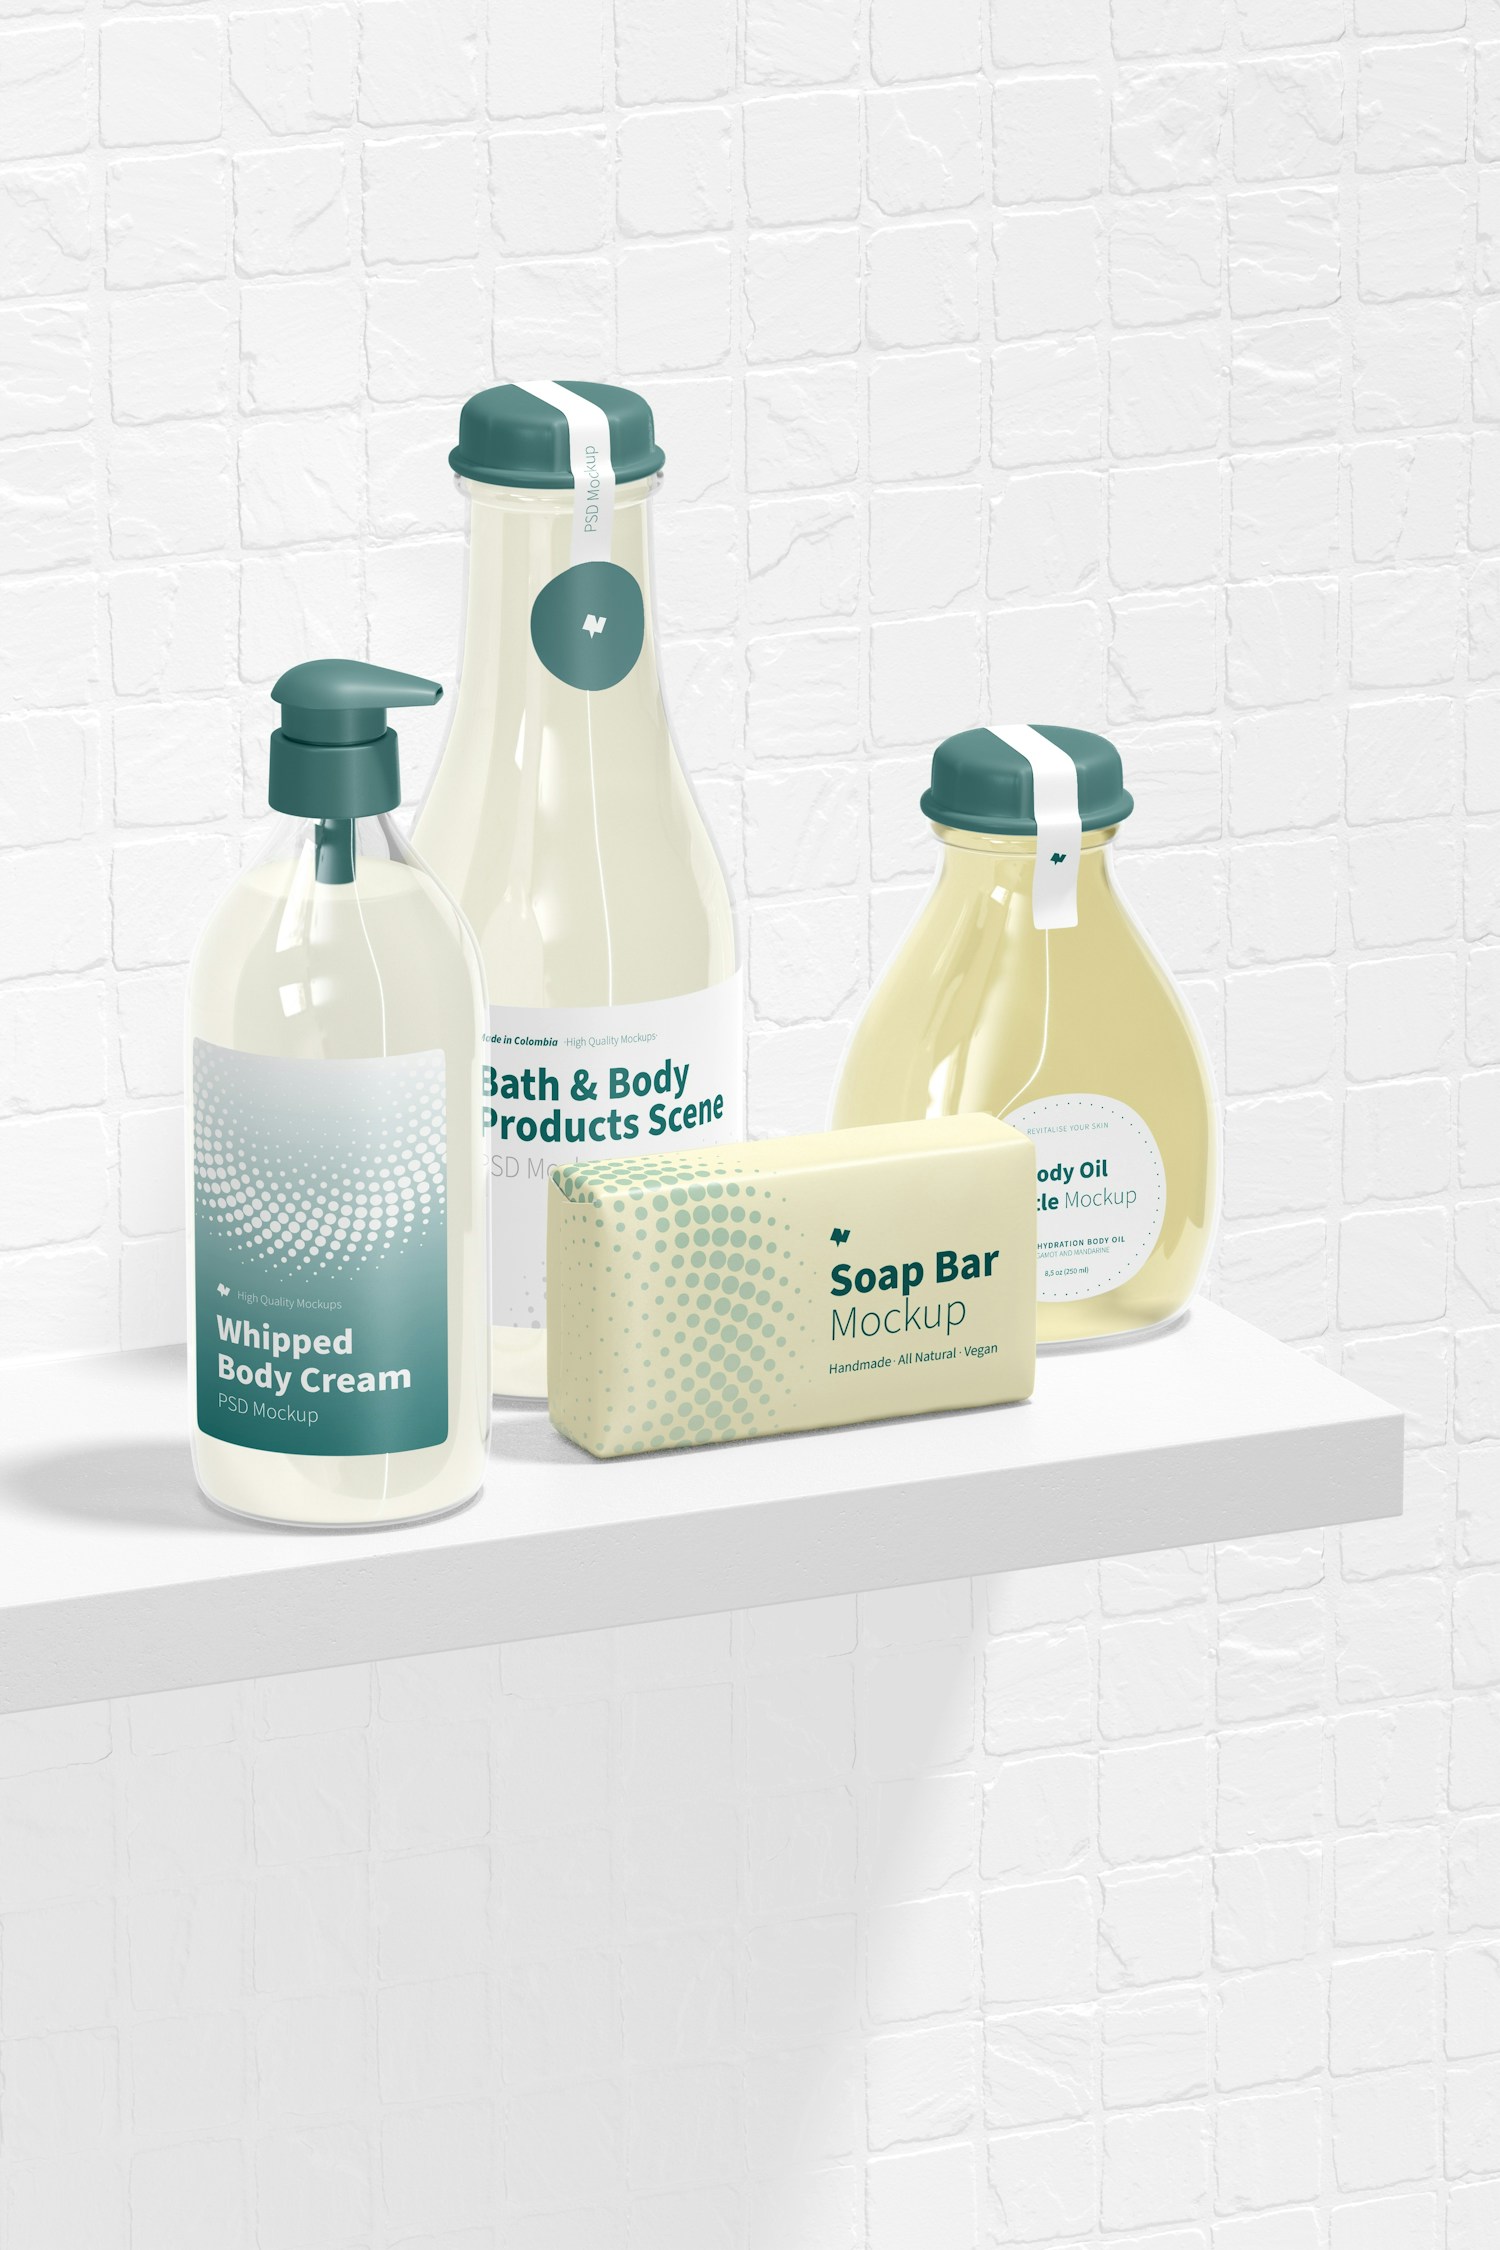 Bath and Body Products Scene Mockup, Perspective